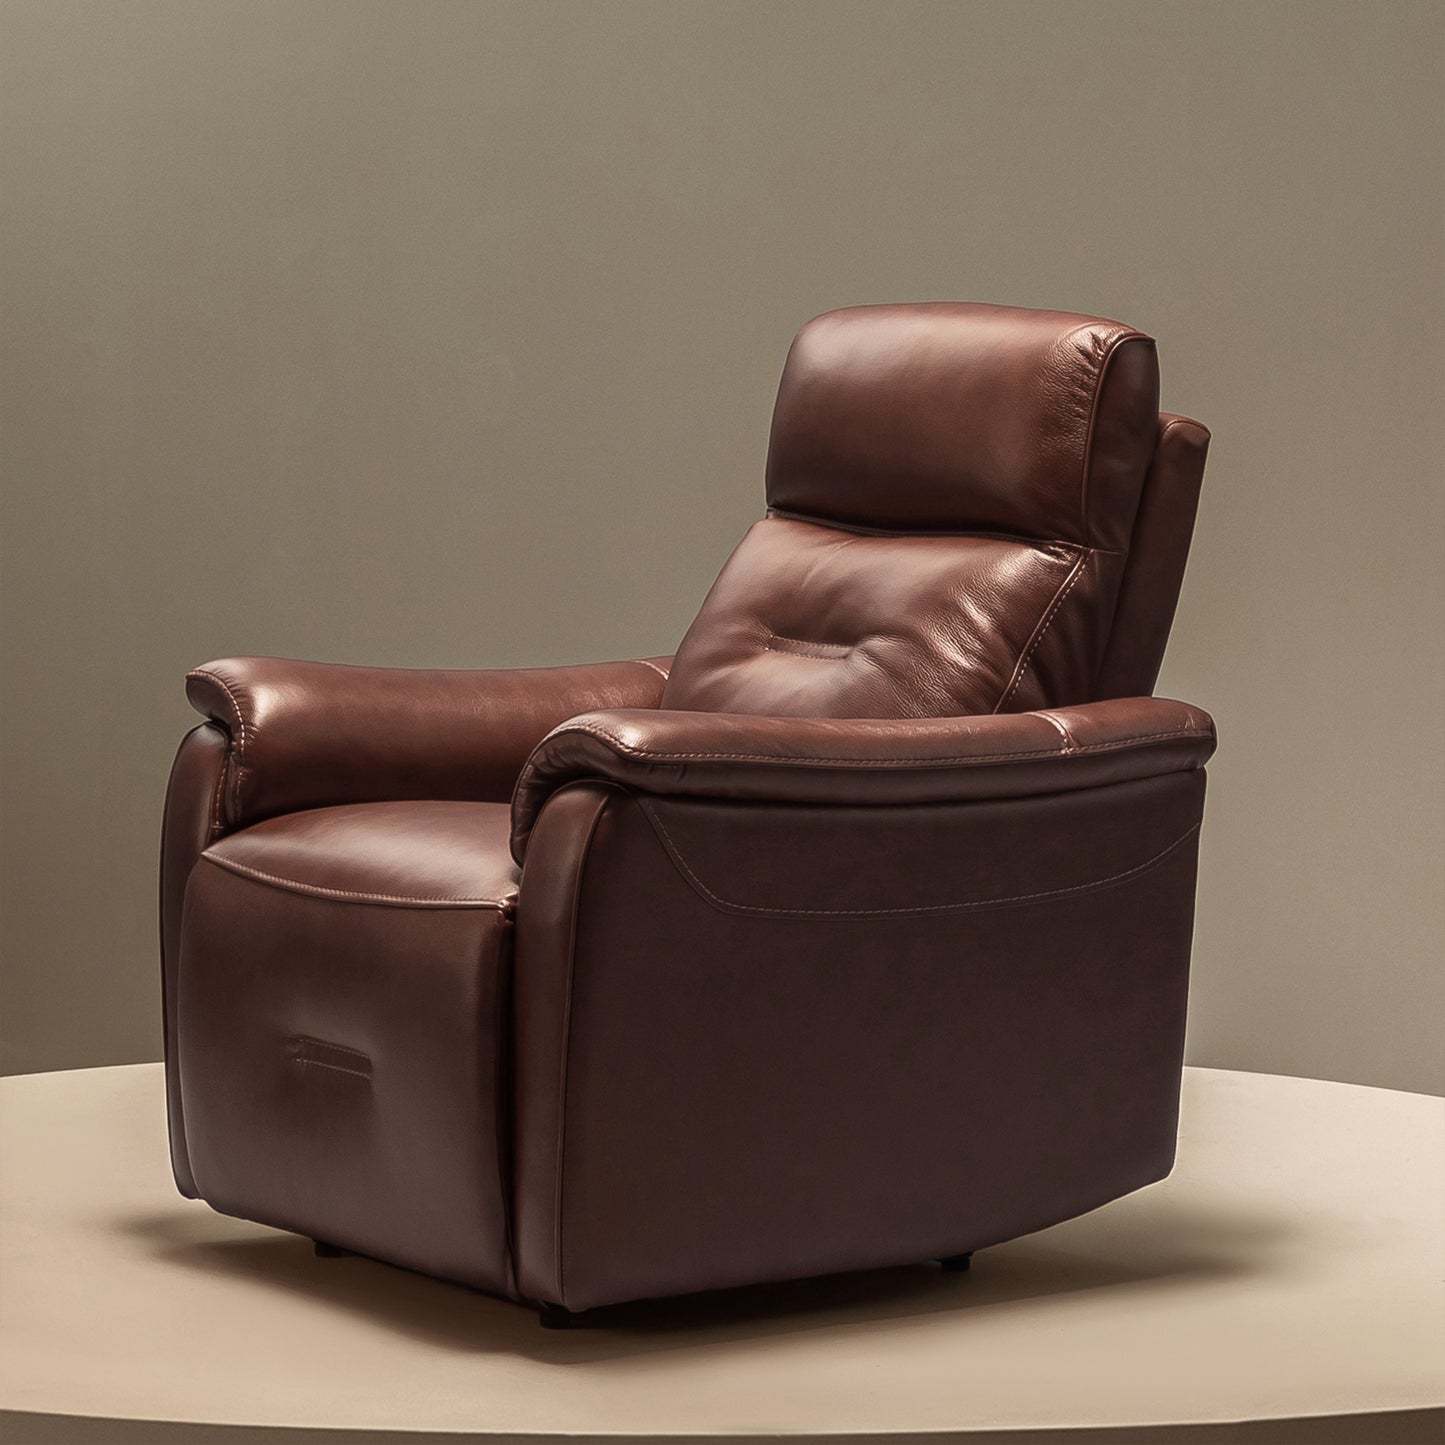 EGO Adjustable Leather Recliner Chair